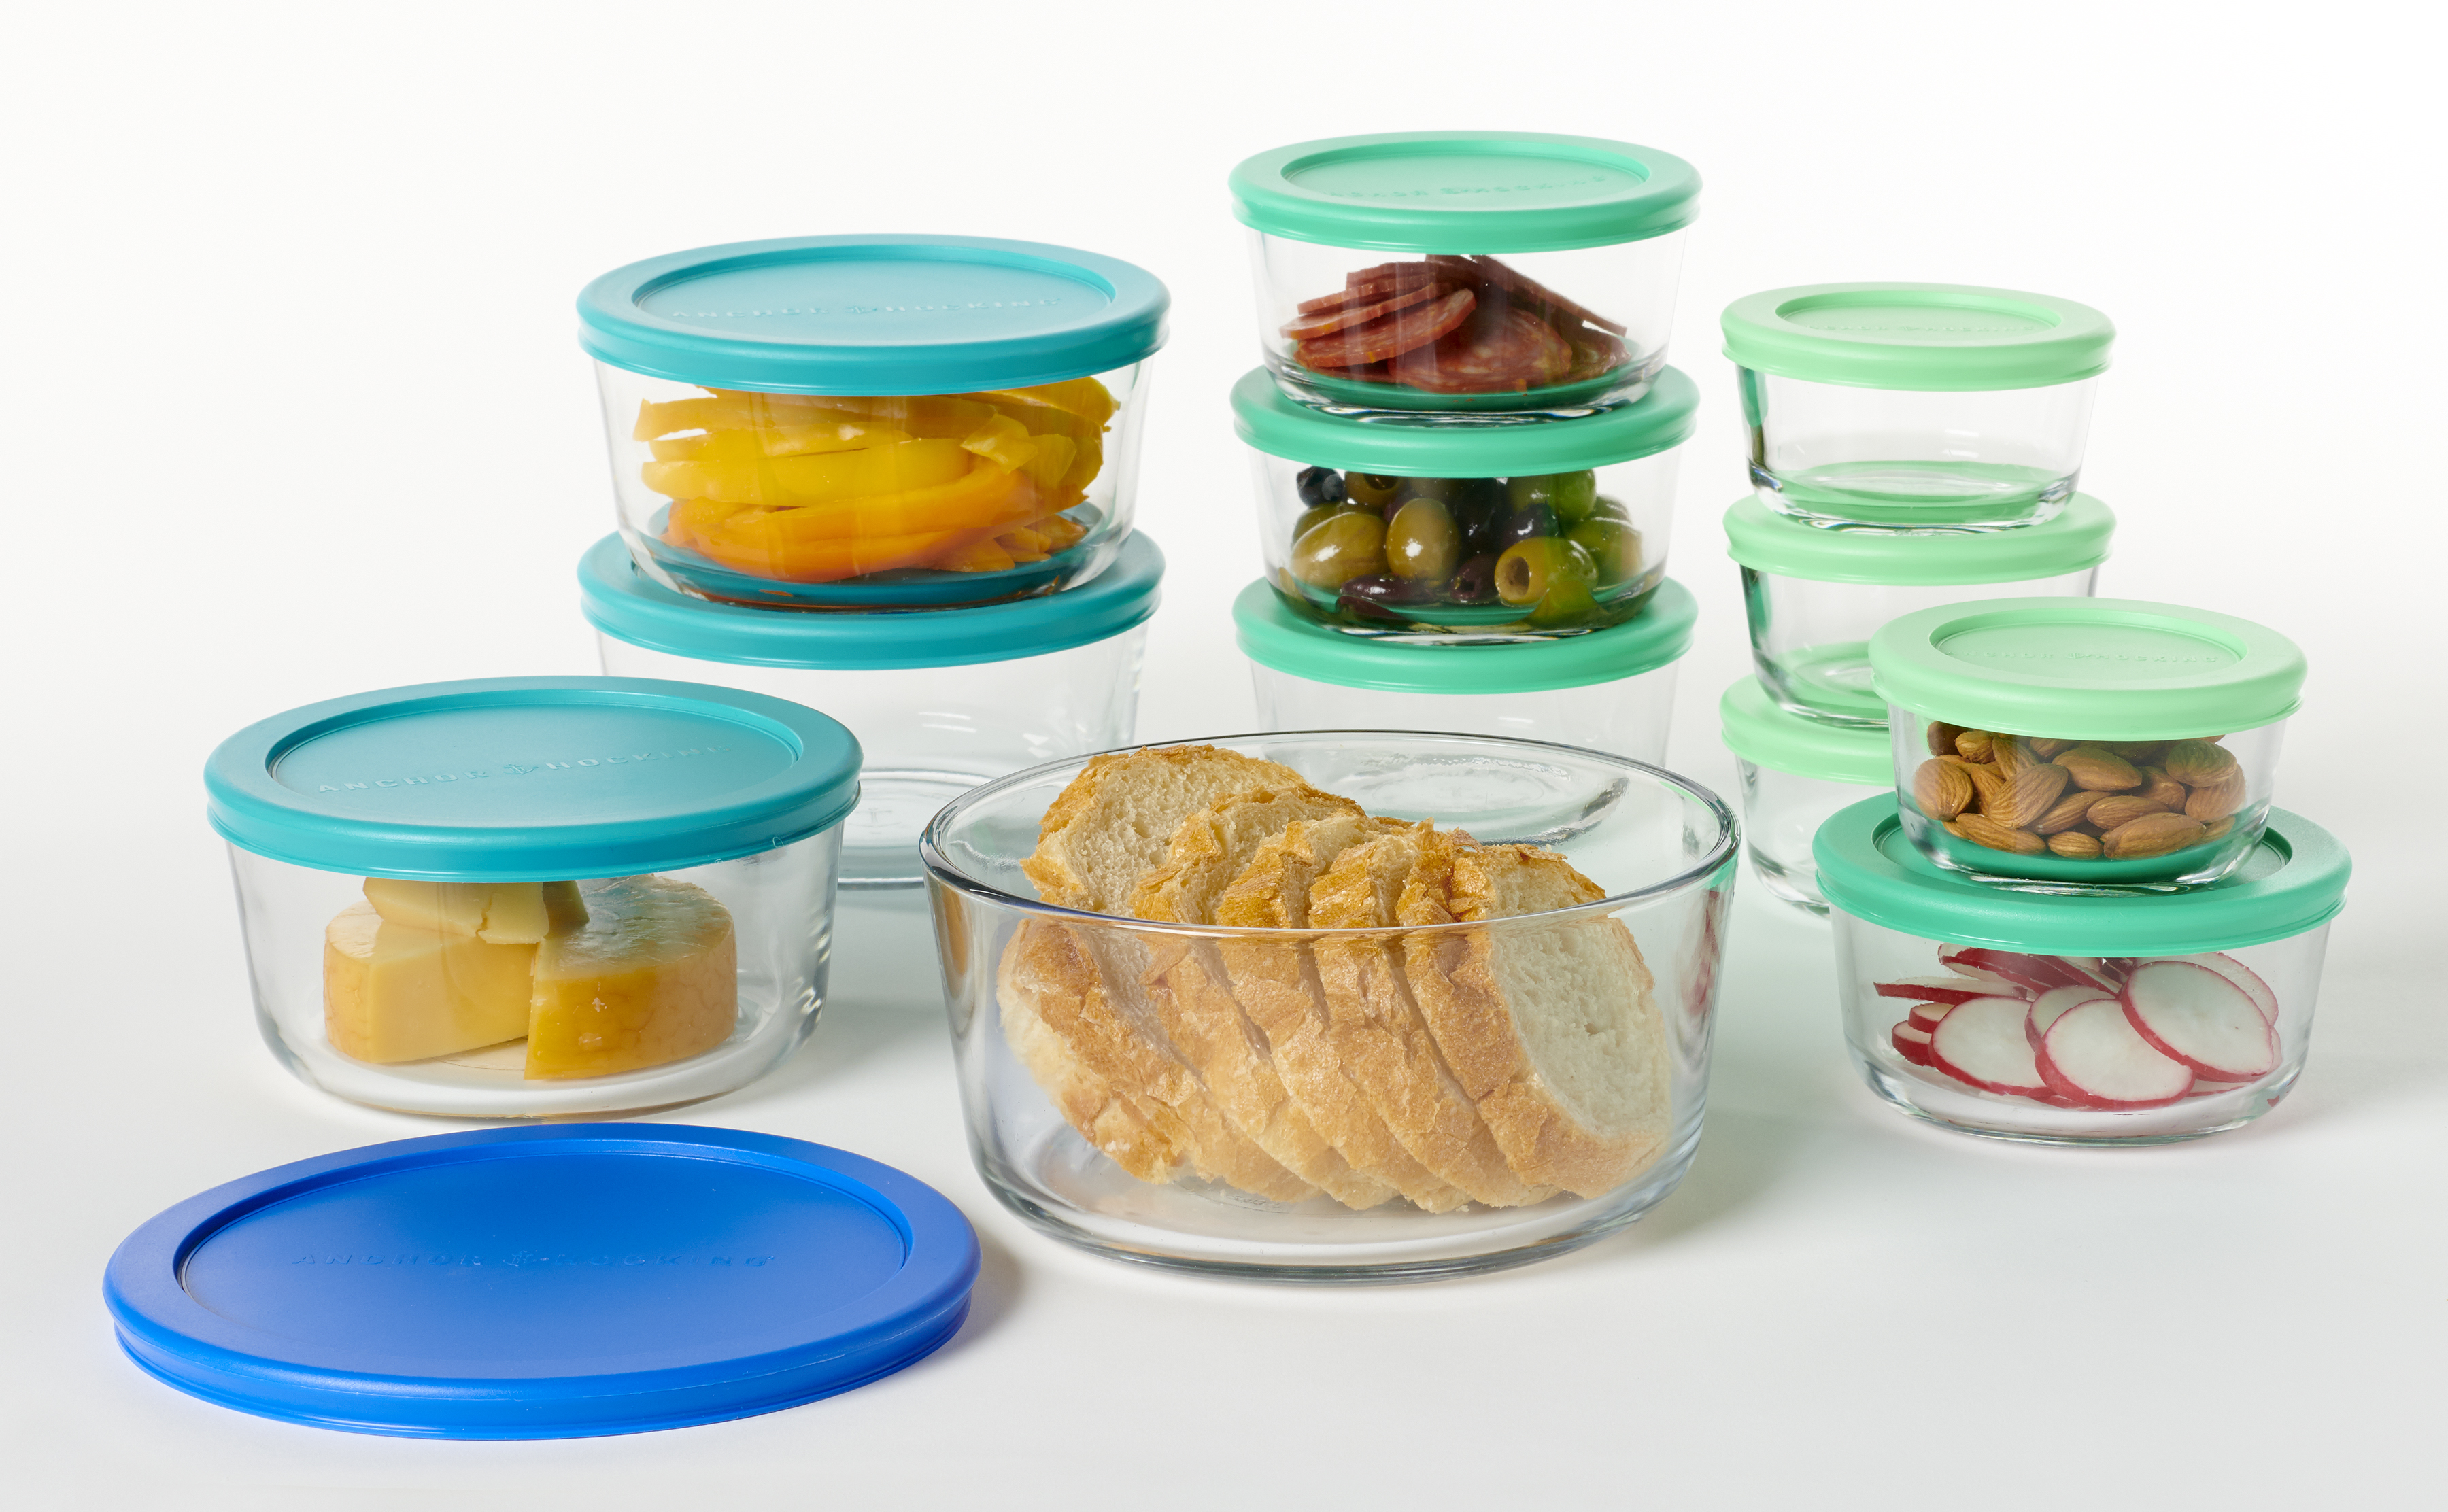 Anchor Hocking Clear Glass Food Storage Glass Set with SnugFit™ Multicolor Lids, 24 Piece Set - image 4 of 10